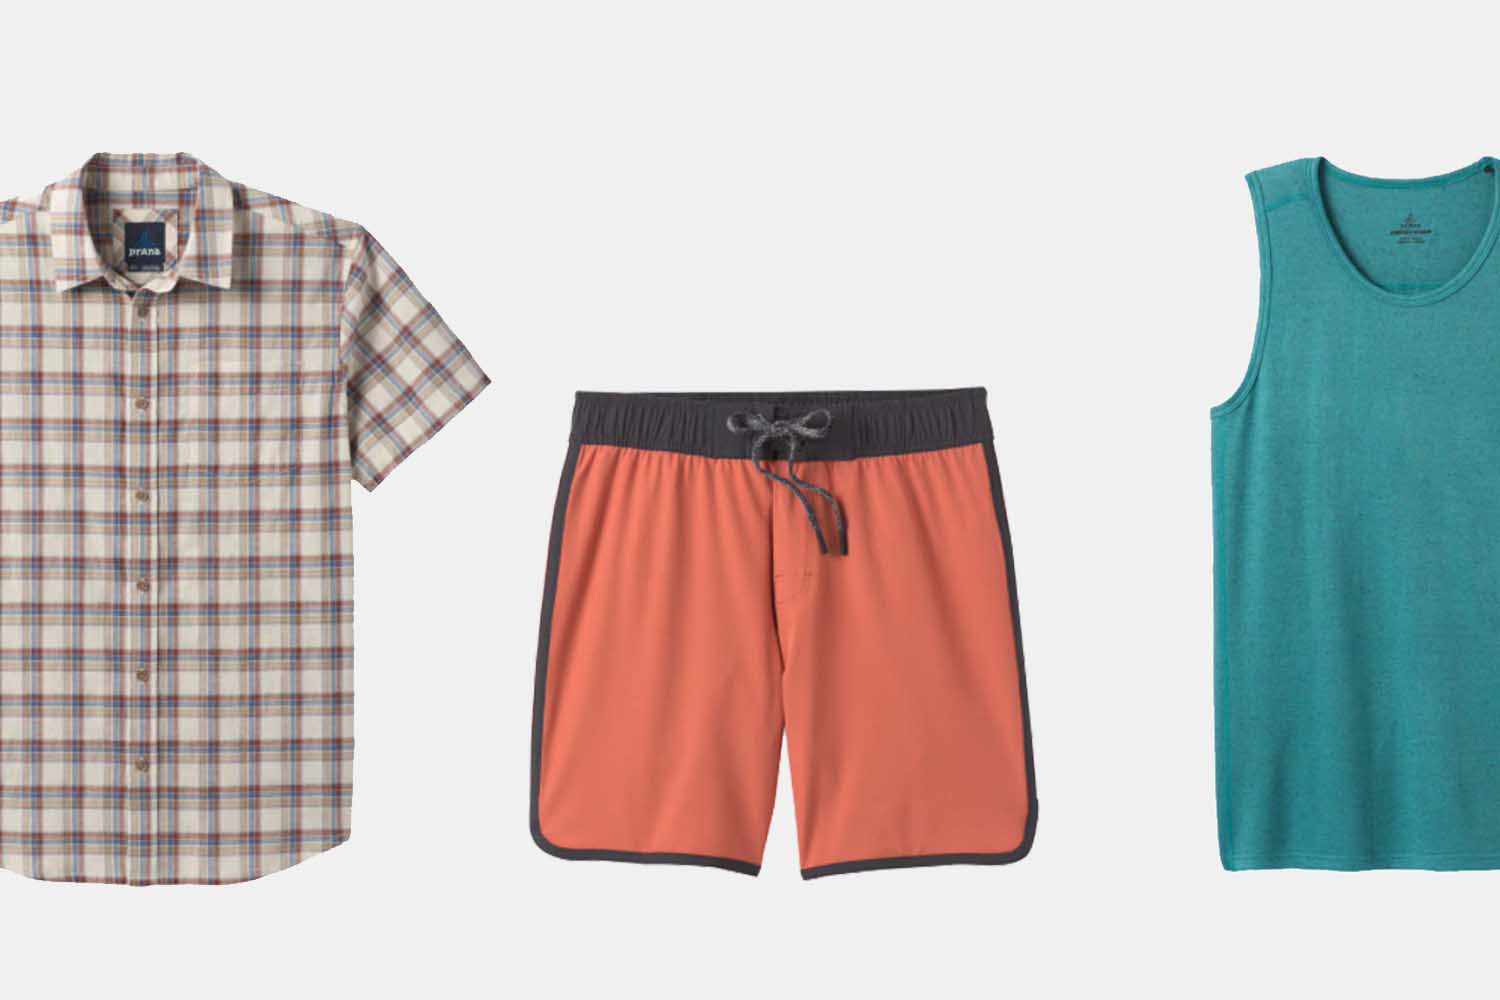 Deal: Save Up to 40% On Adventure-Ready Summer Styles at Prana